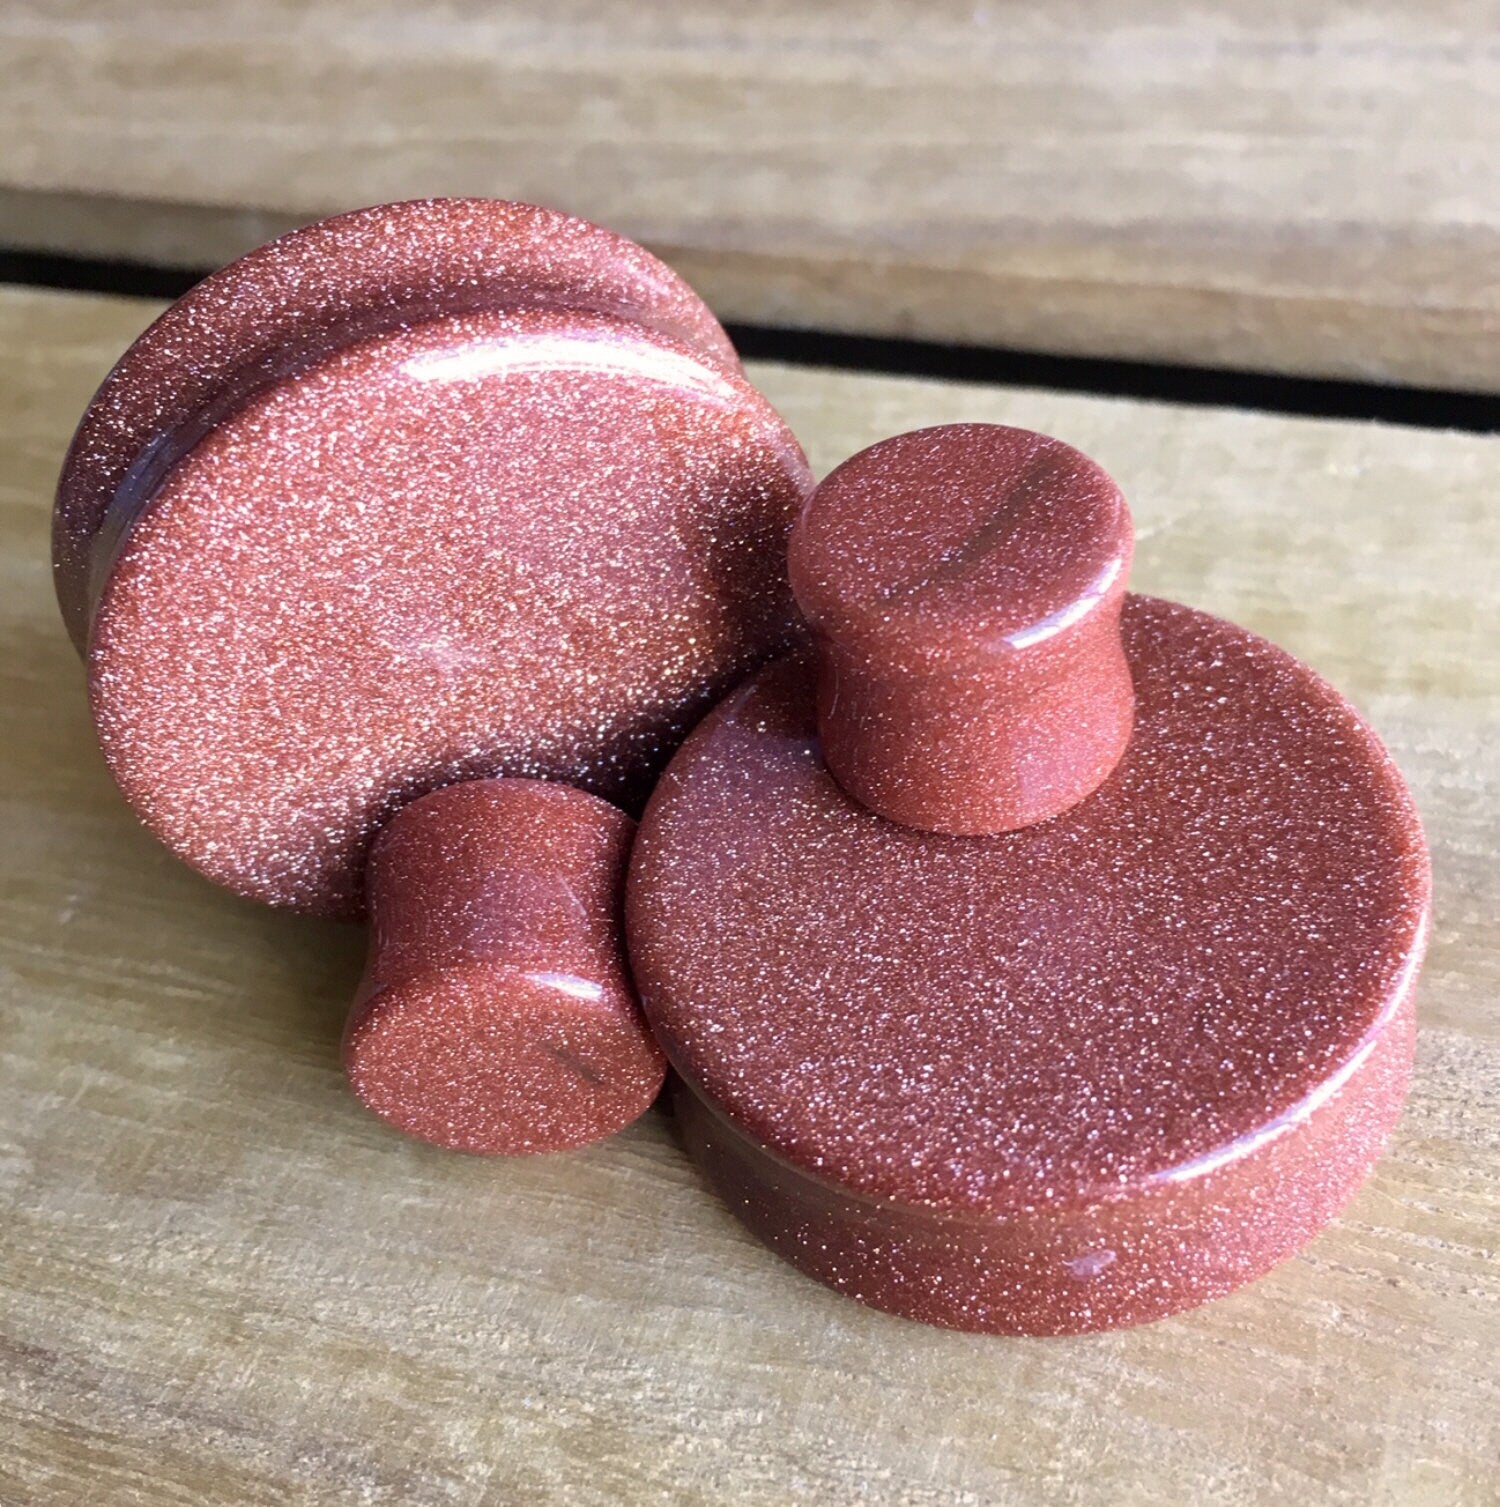 PAIR of Stunning Organic Gold Sandstone Stone Plugs - Gauges 8g (3mm) up to 1&1/2" (38mm) available!